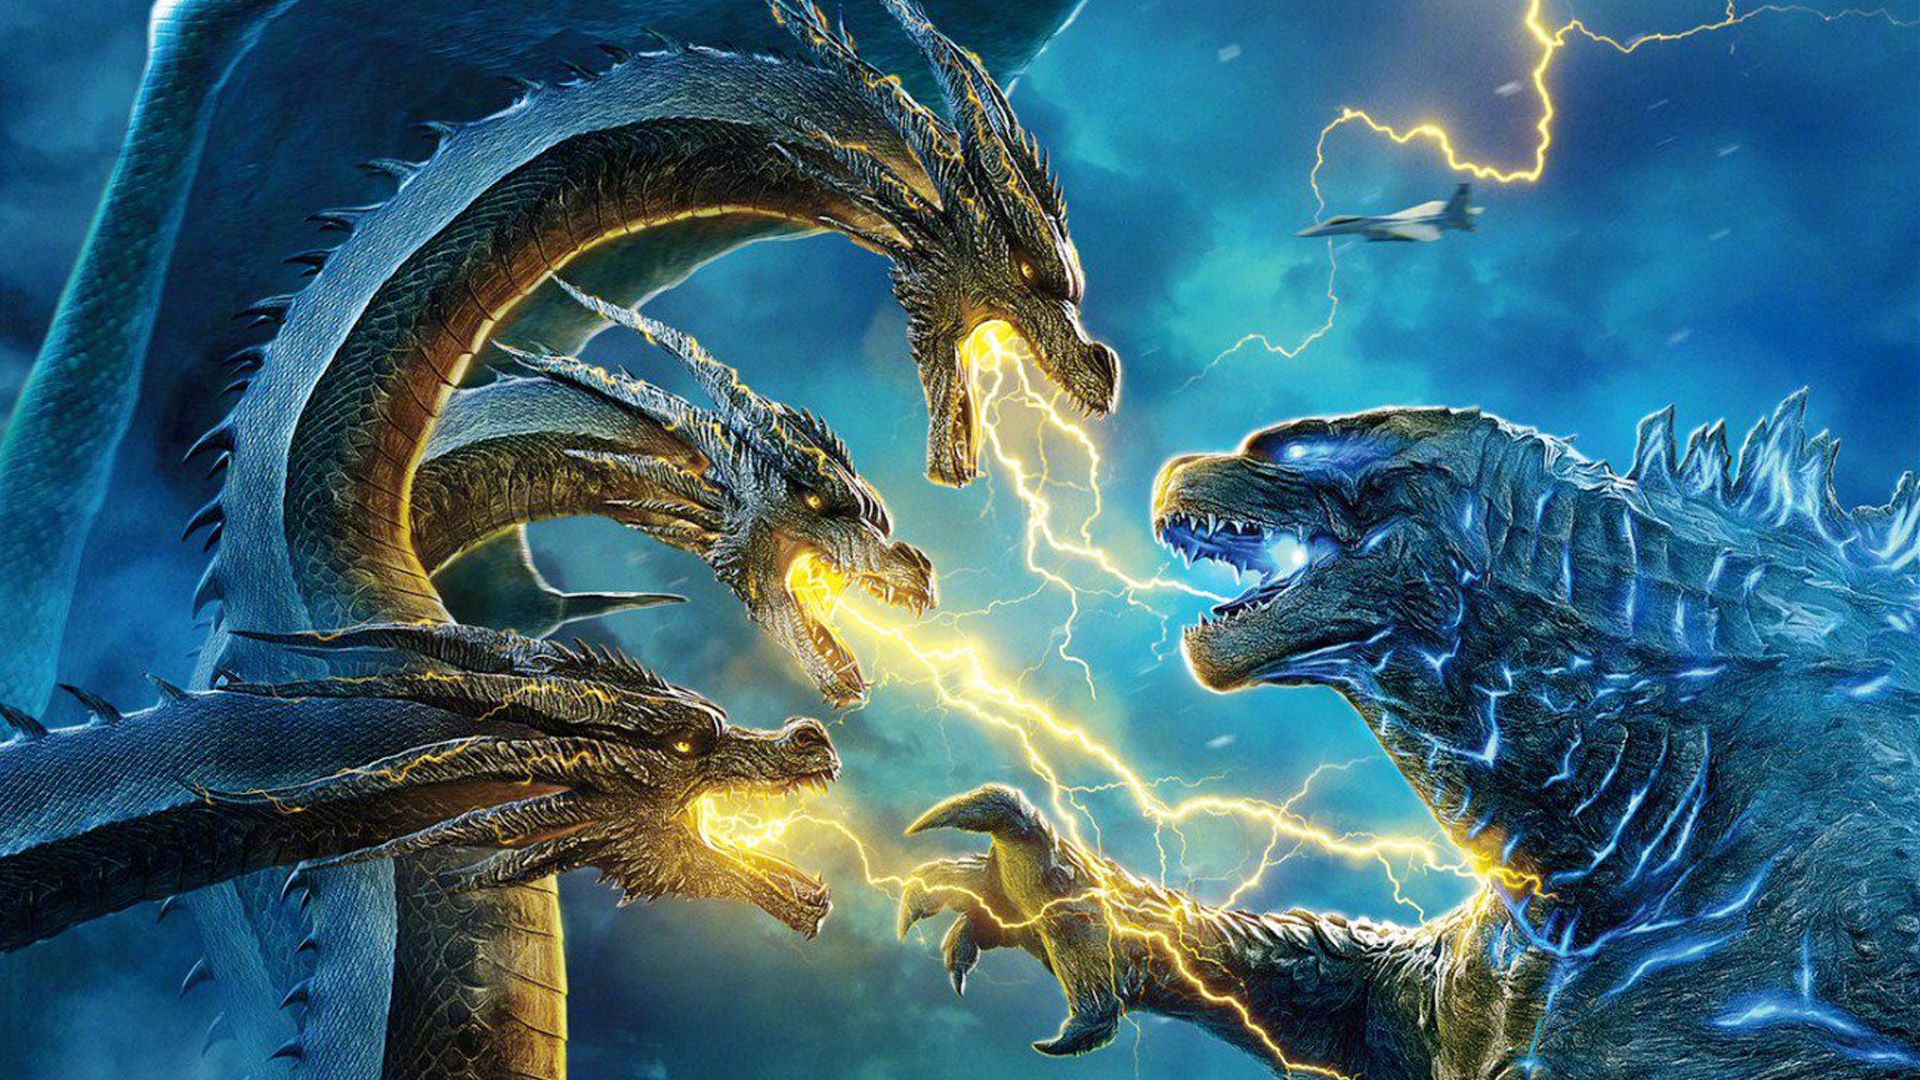 Godzilla: King of the Monsters (2019) Movie Reviews